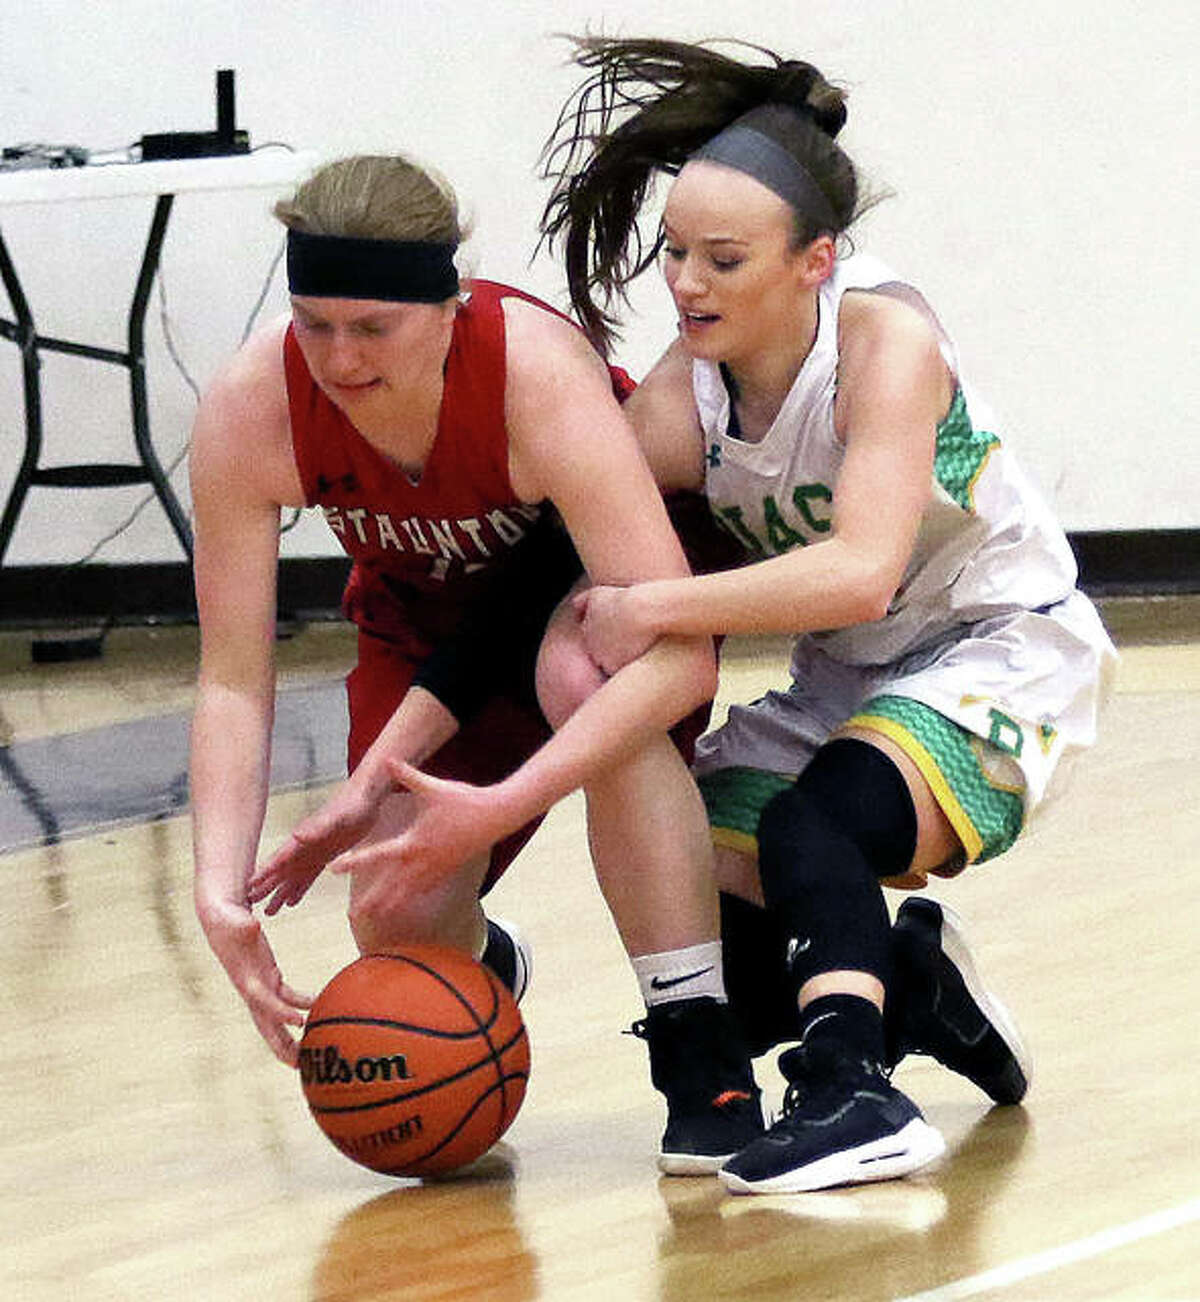 Staunton’s Rebecca Caldieraro (left) and Southwestern’s Abbey Burns battle for a loose ball in the second half of Wednesday night’s semifinal at the Macoupin County Tournament in Mount Olive.